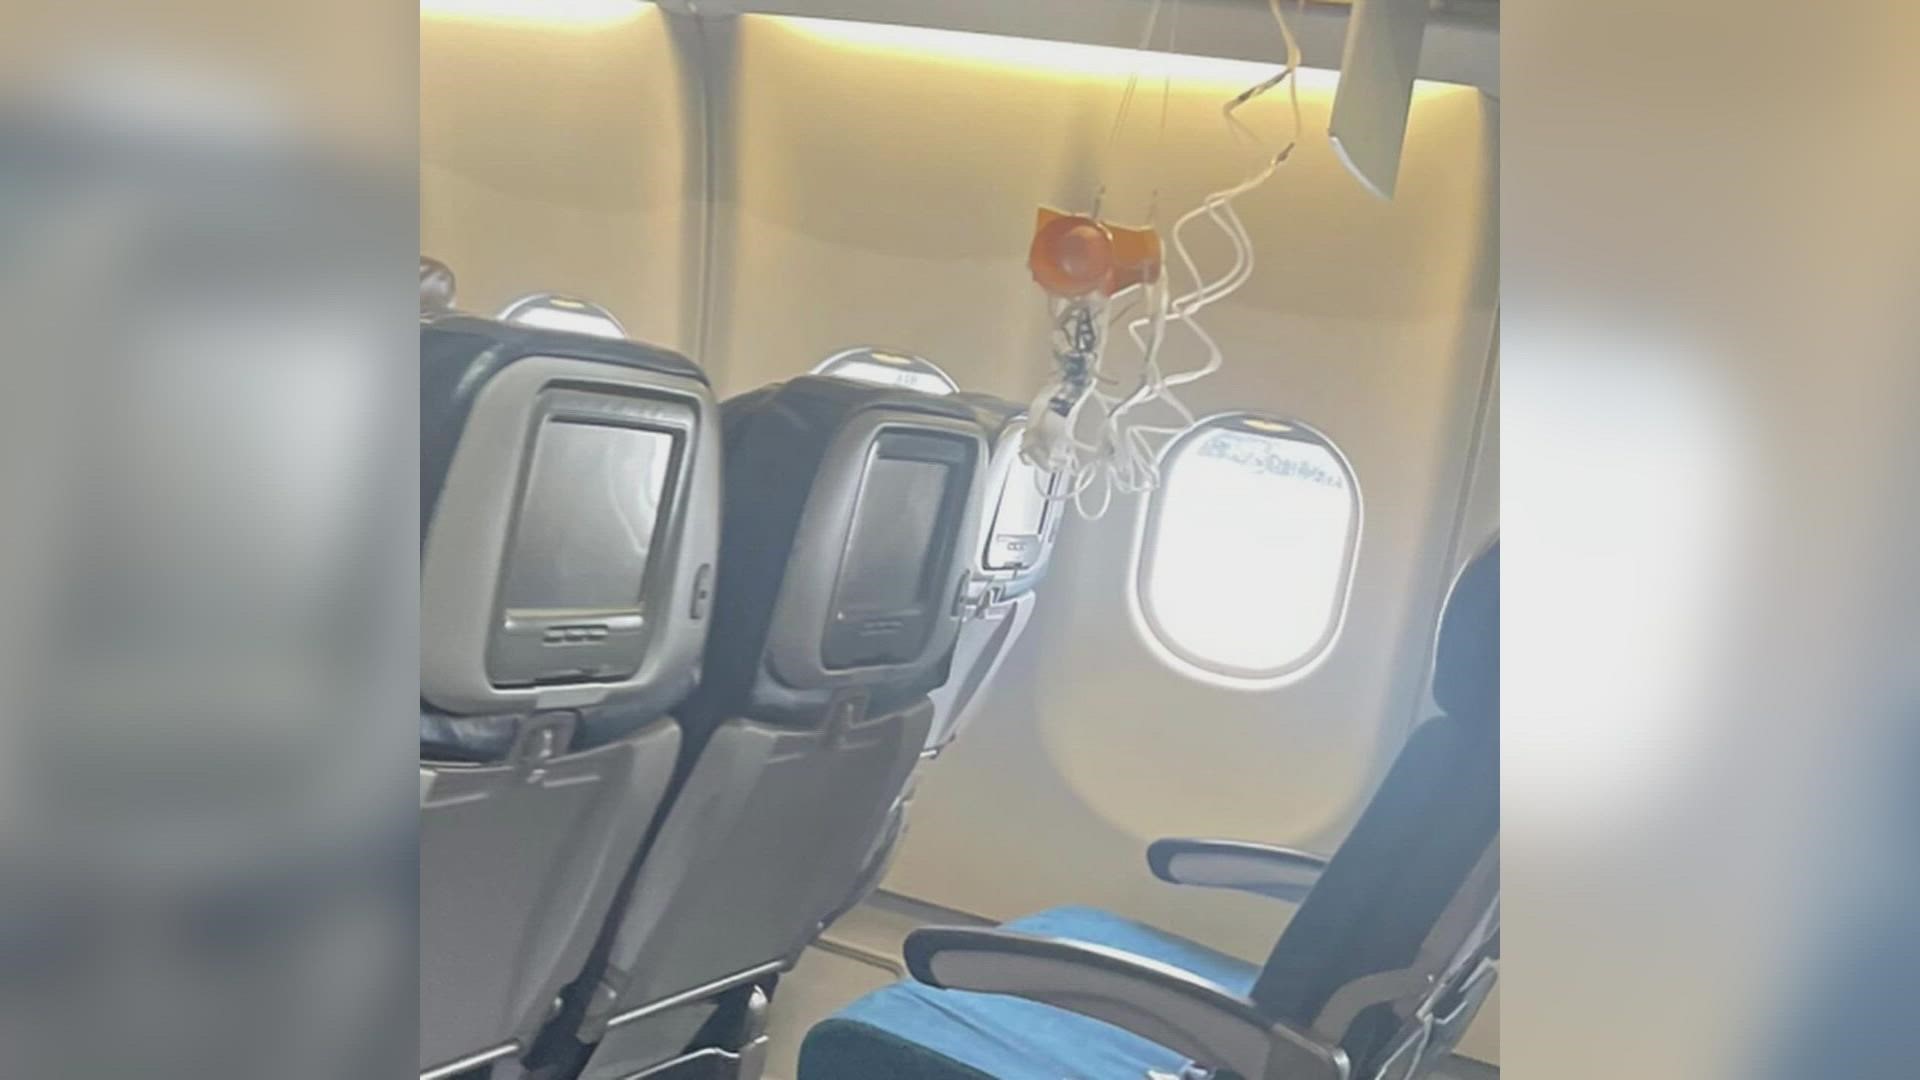 An emergency response agency says 11 people on a flight from Phoenix Sunday suffered serious injuries after the plane encountered severe turbulence.